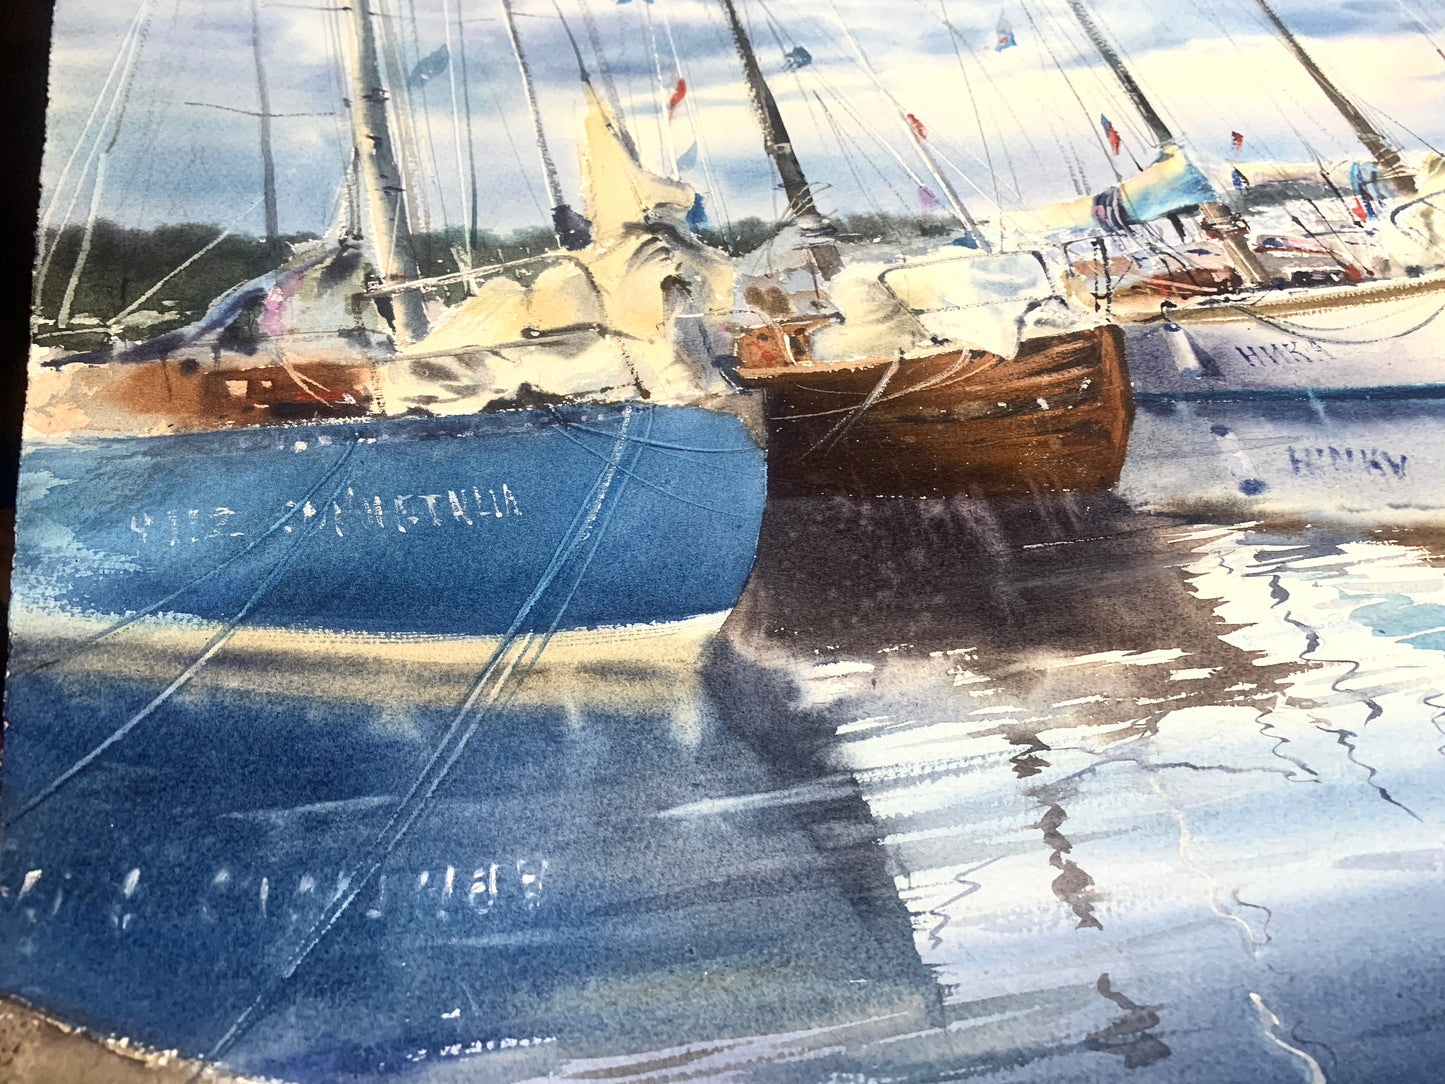 Yachts Moored at the Pier, Original Watercolor Painting, Unique Exhibition Artwork